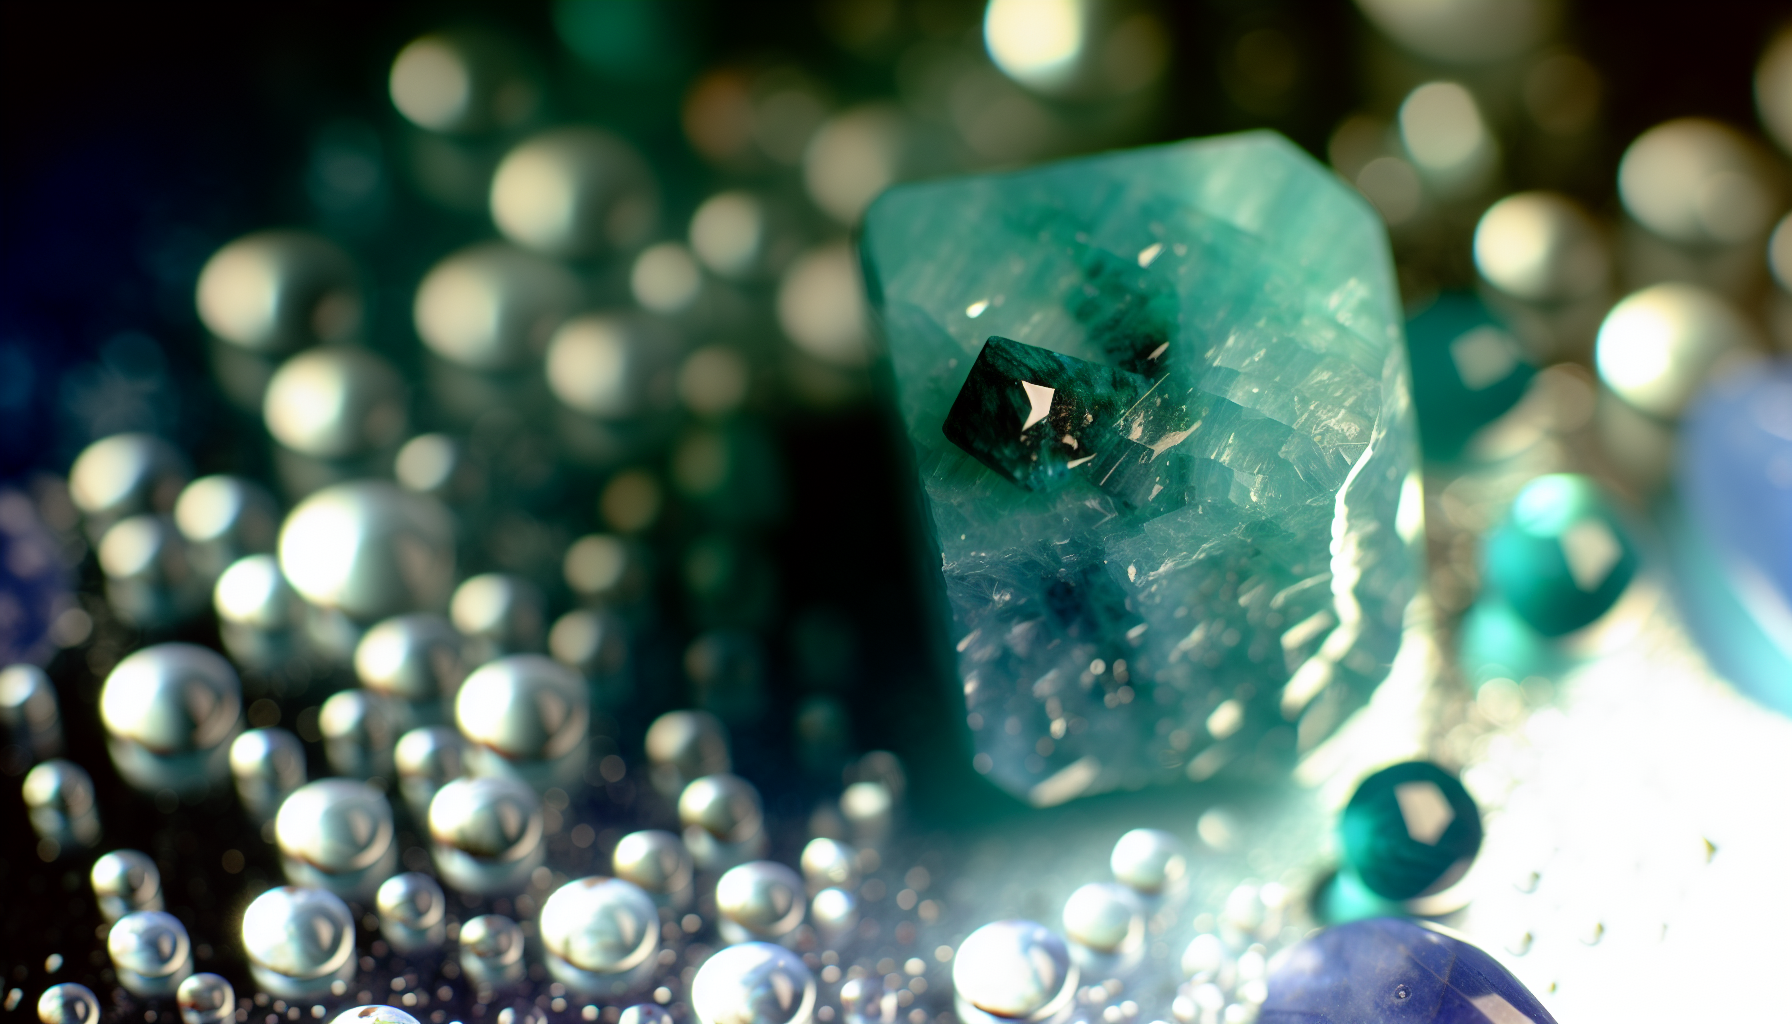 Amazonite crystal surrounded by water droplets with blurred background of other crystals